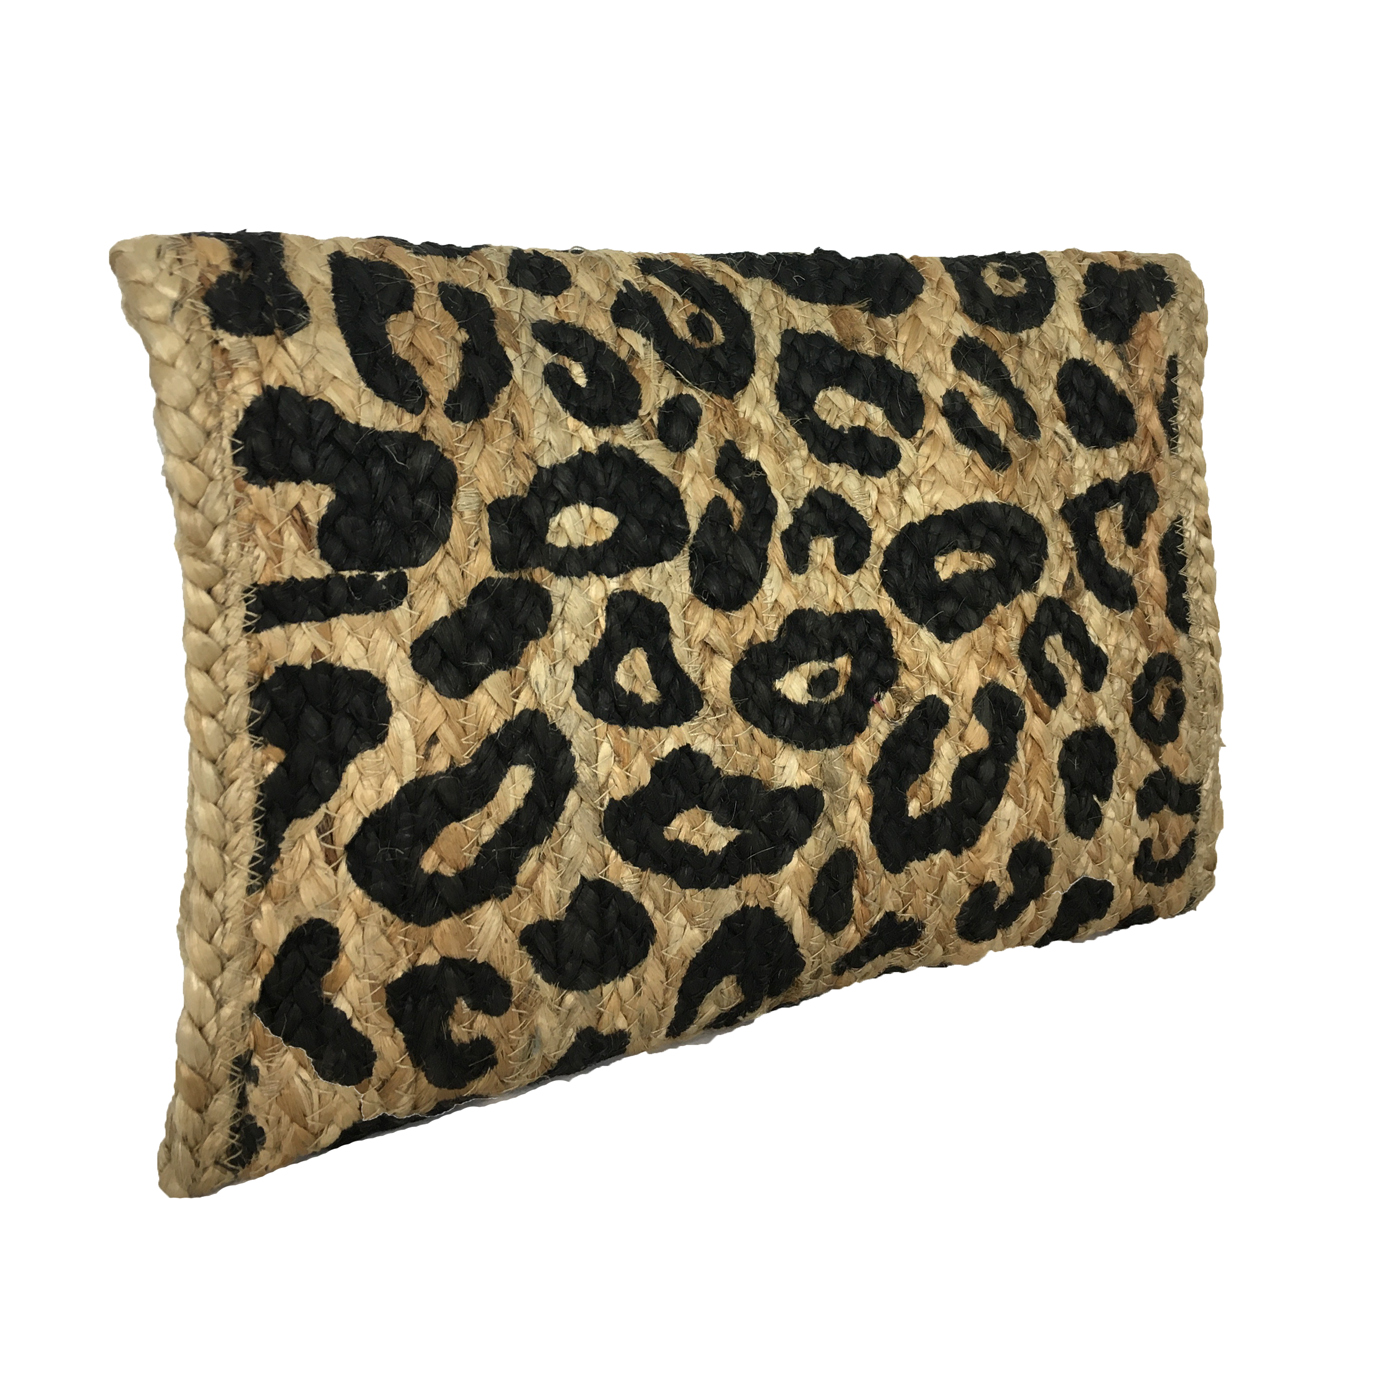 Magid Leopard Print Woven Jute Straw Clutch, Natural - image 2 of 3